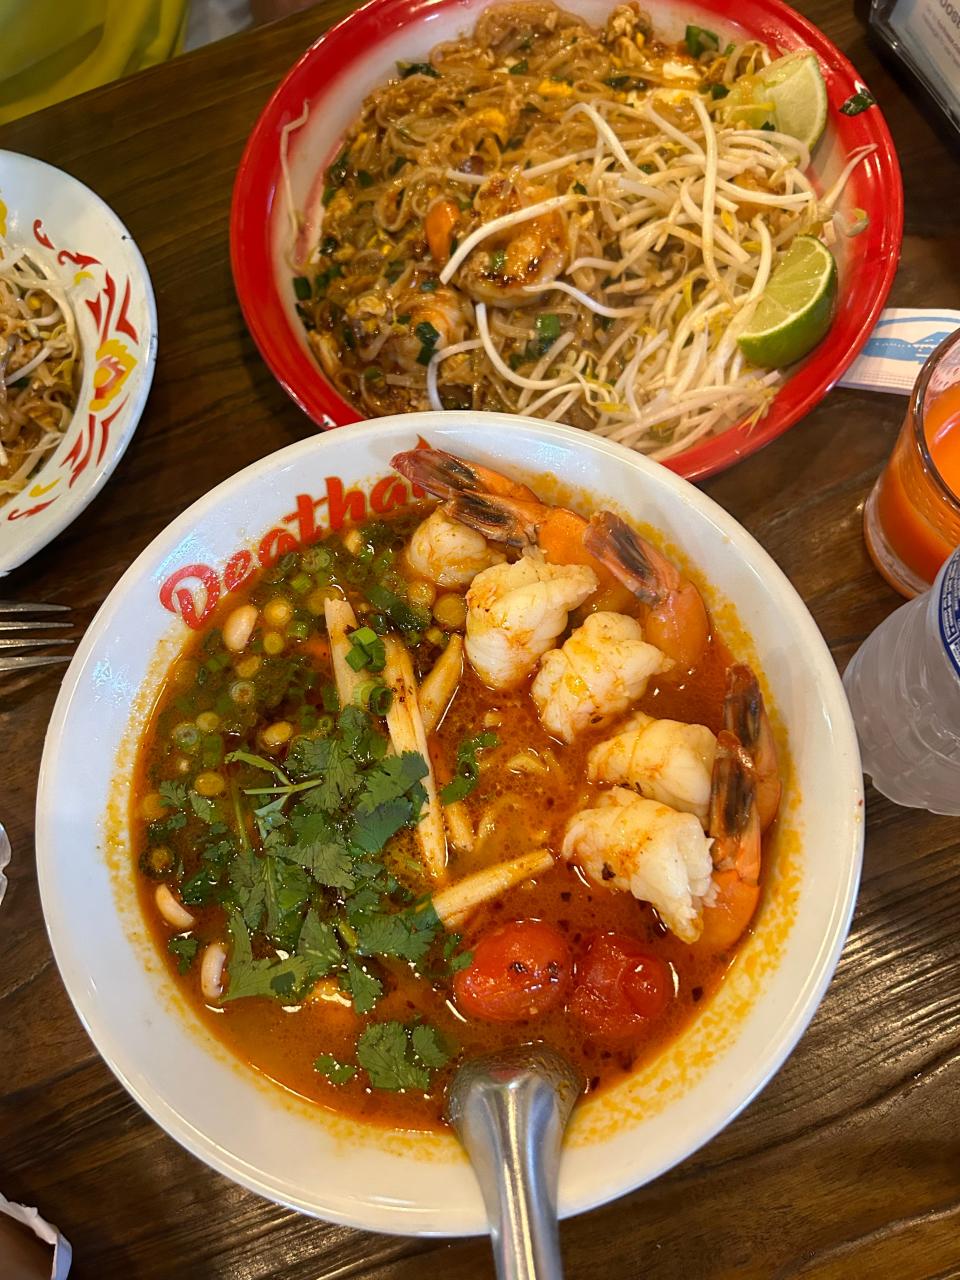 Spicy noodles and an assortment of other dishes at Degthai.